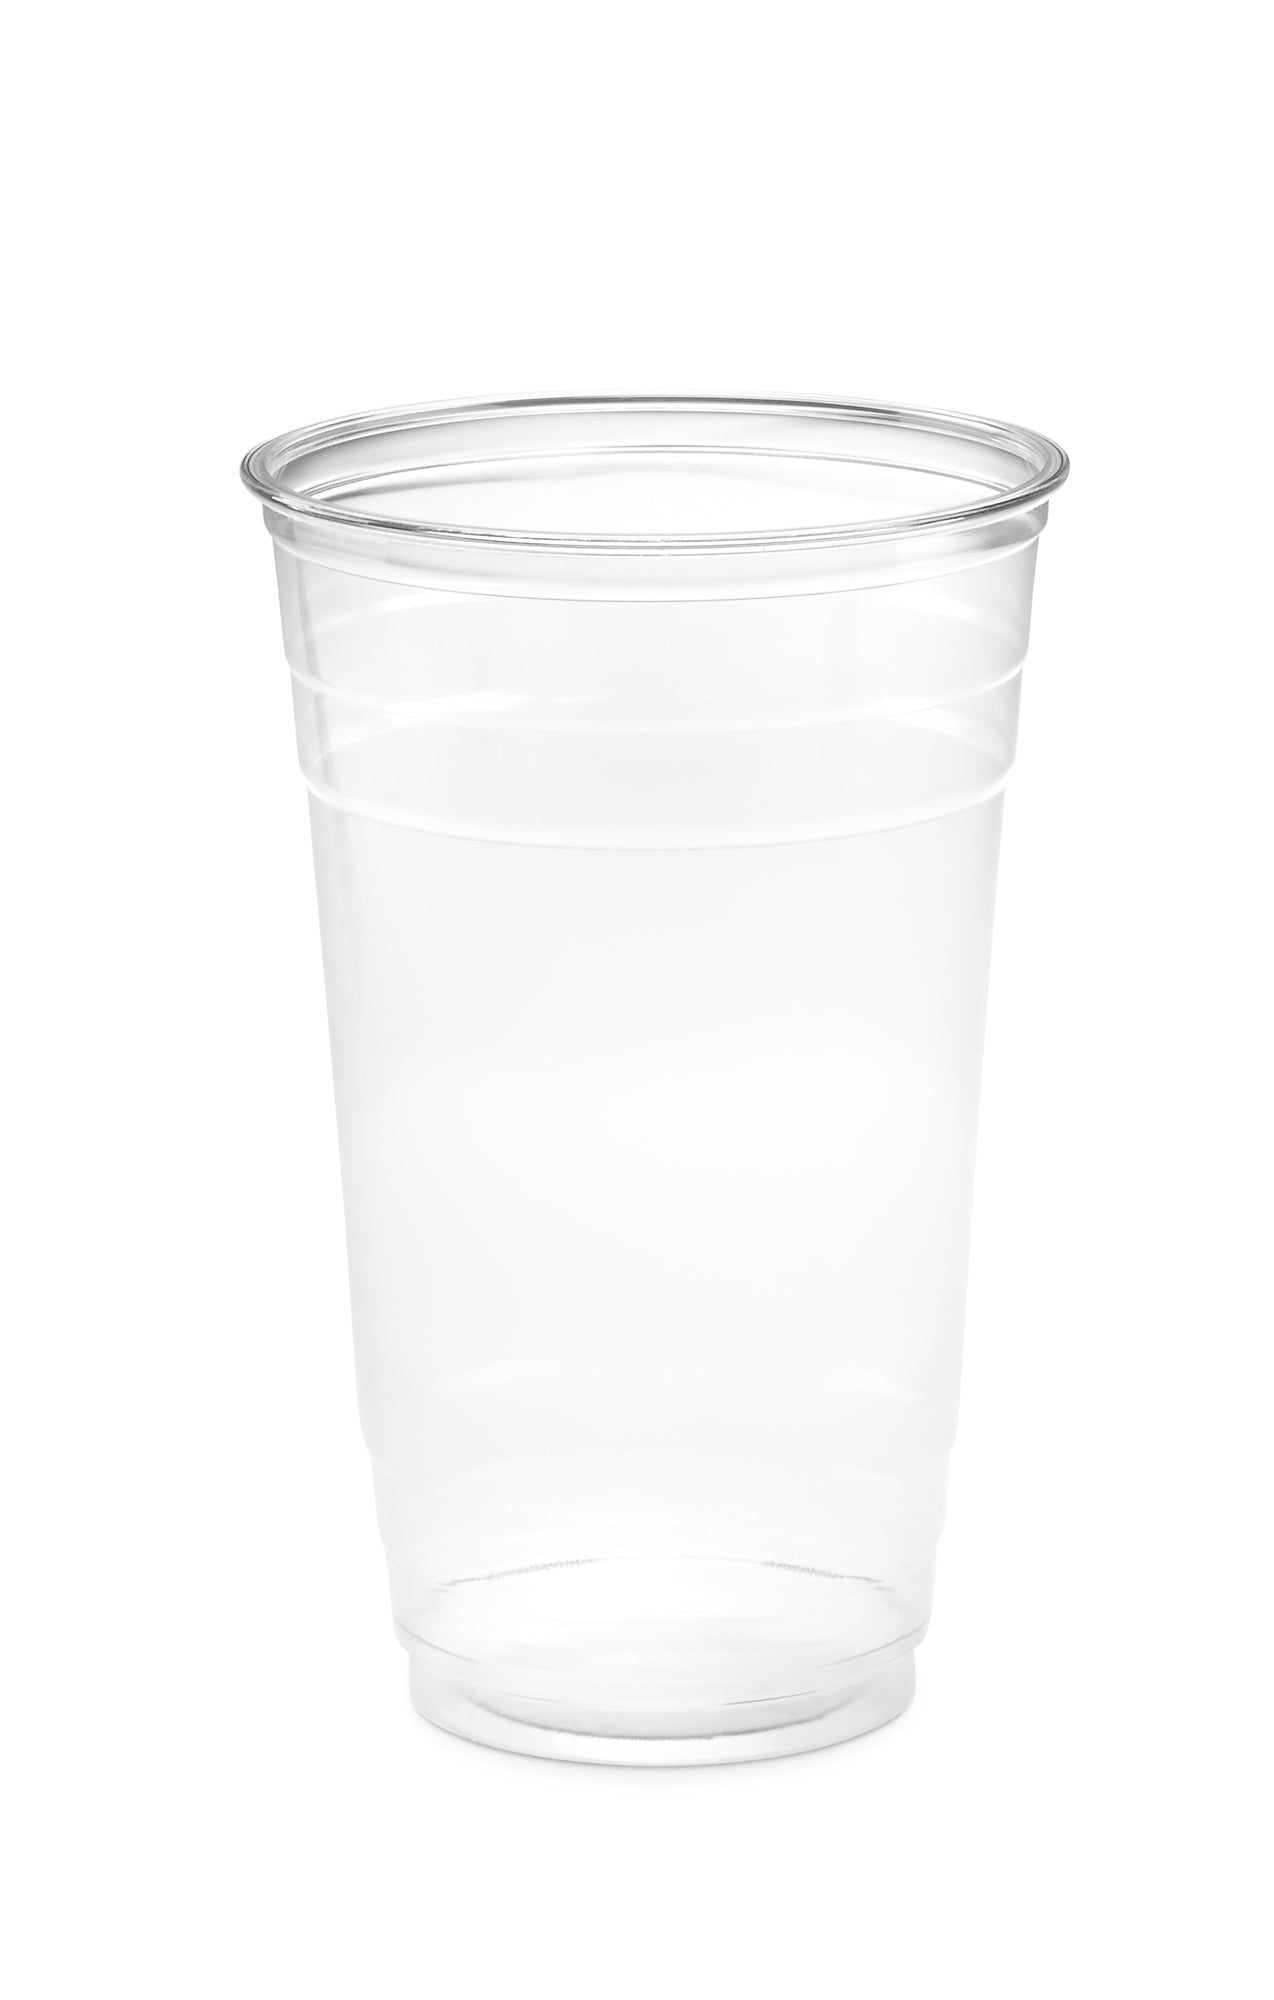 100 Sets - 16 oz. Clear Plastic Cups with Straw Slot Lid, PET Crystal Clear  Disposable 16oz